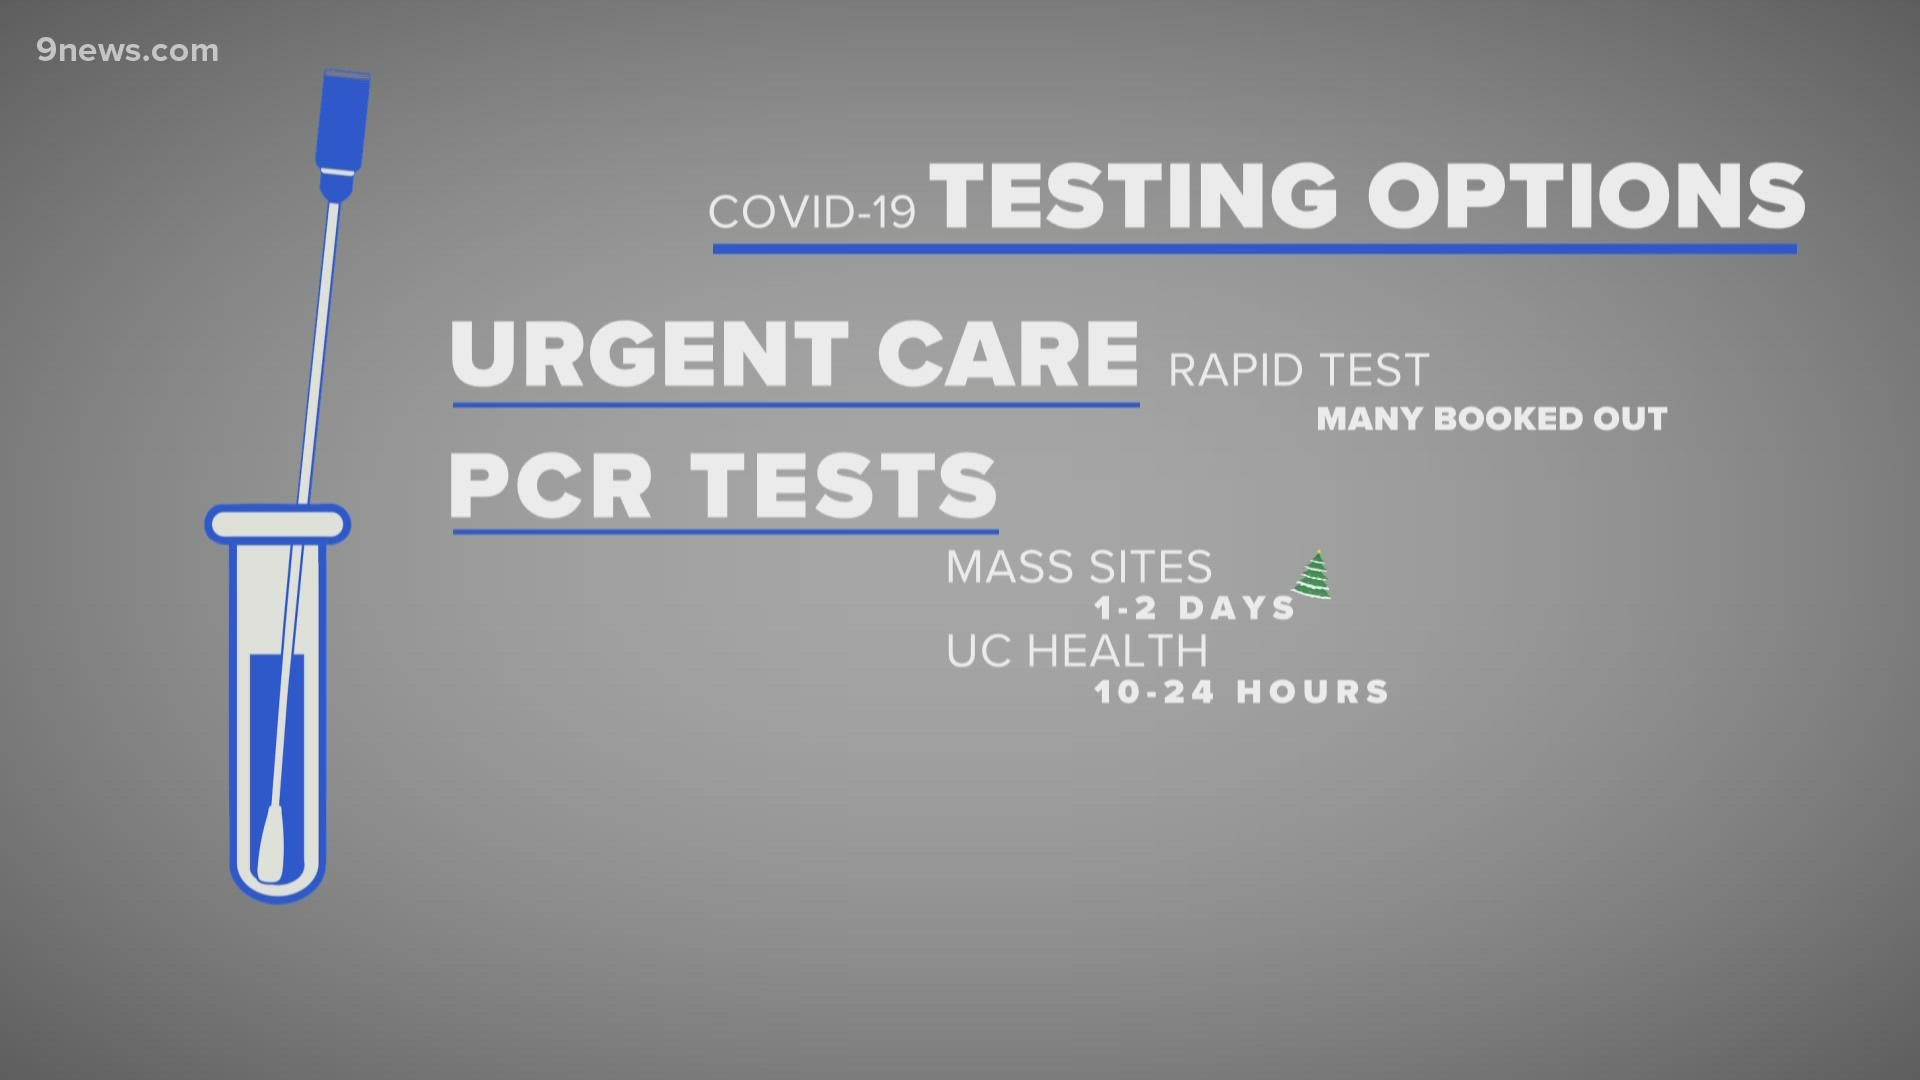 Public health officials say there is still plenty of capacity at the state testing sites.